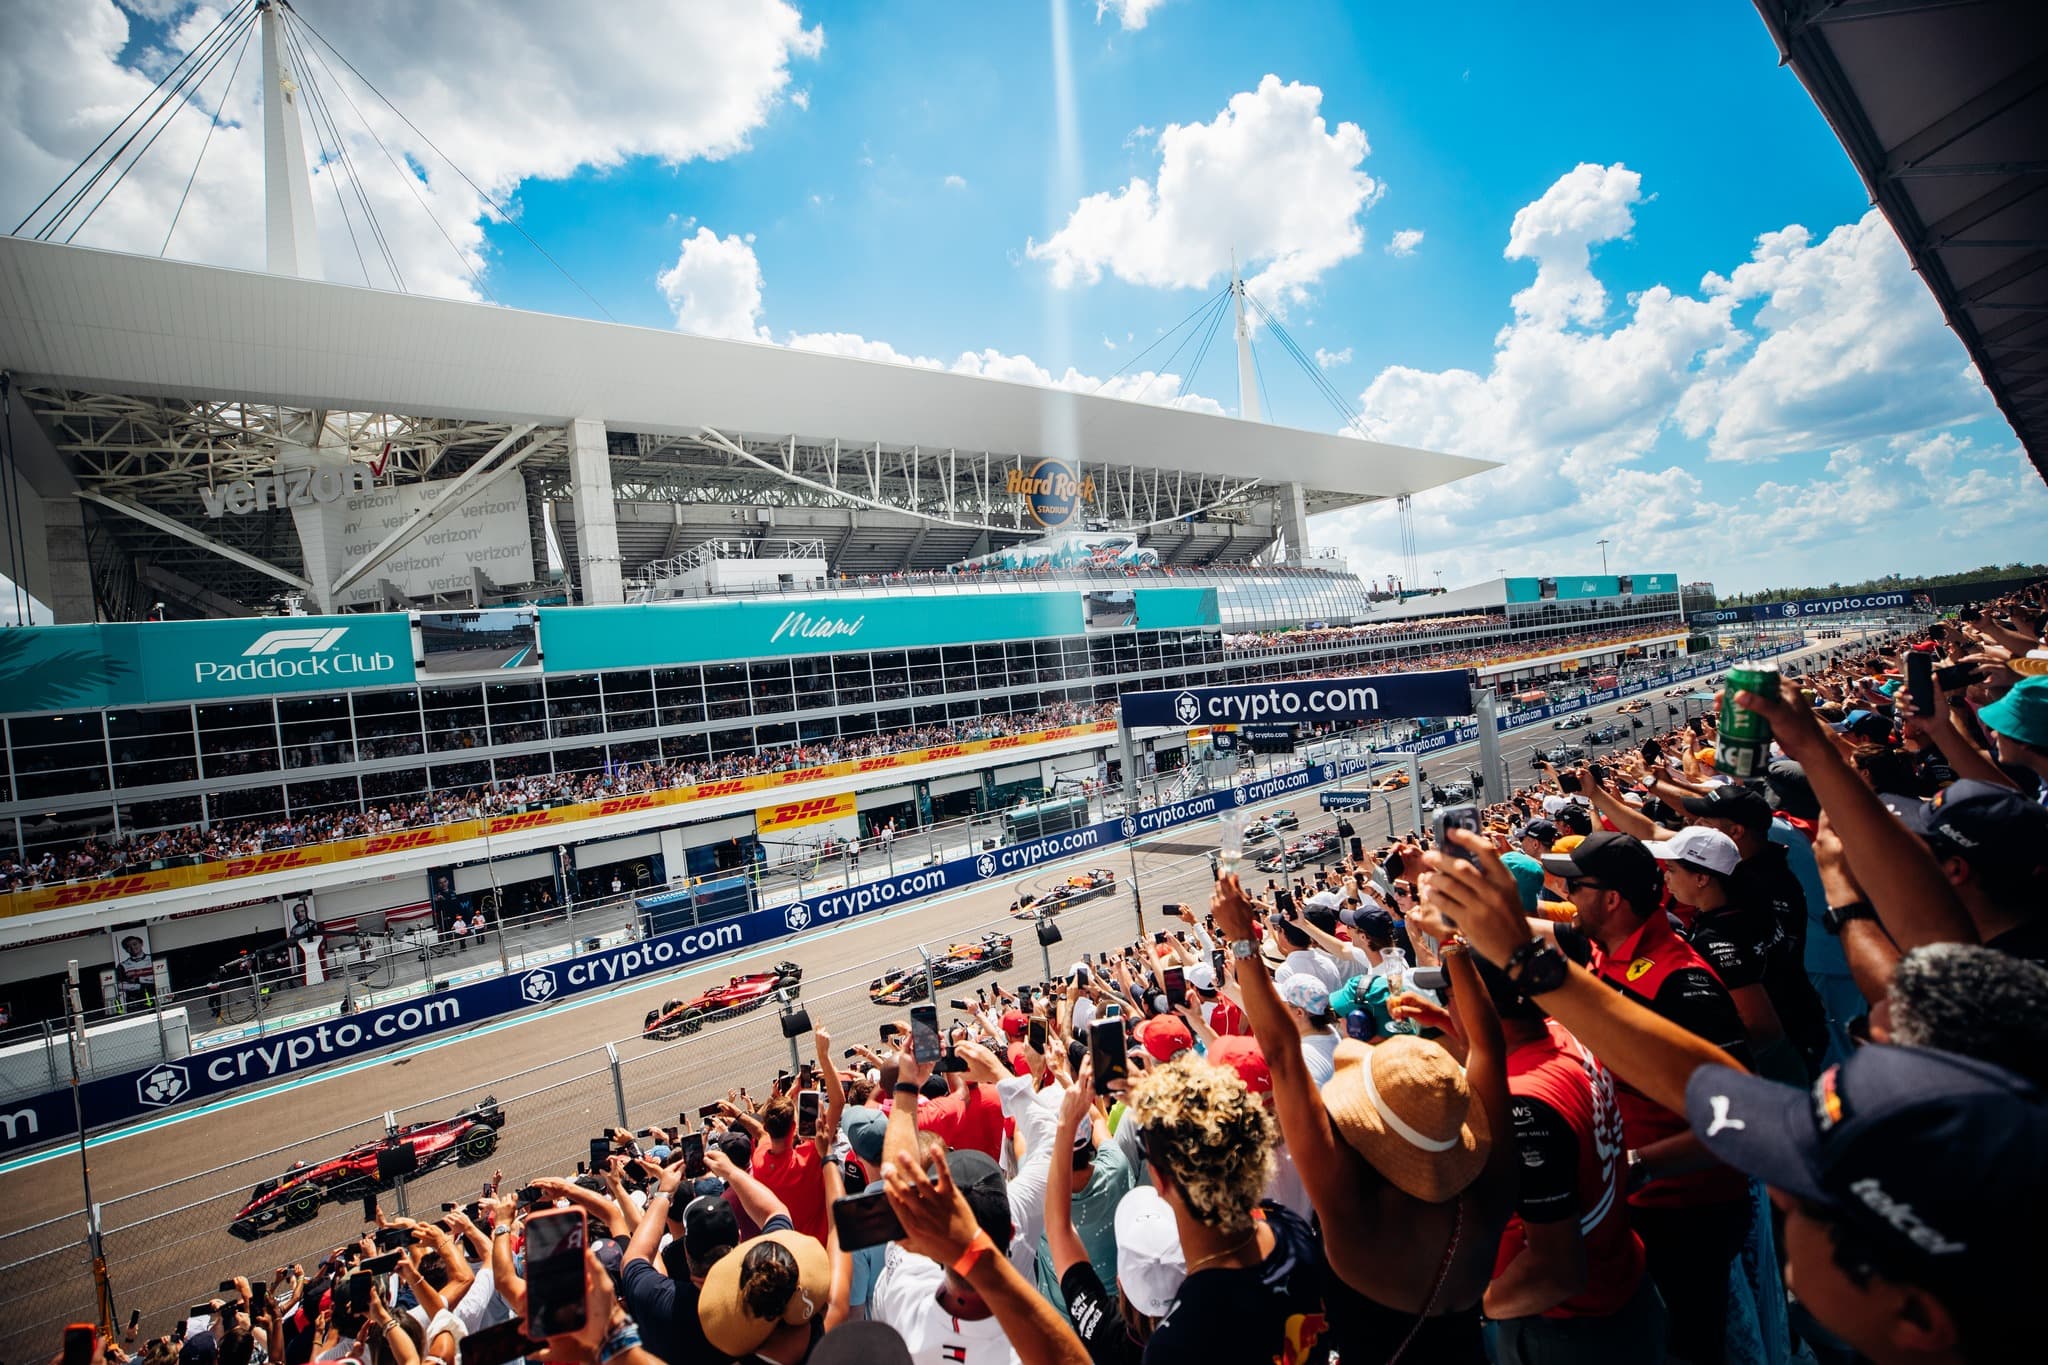 Best Formula 1 Miami 2023 Grand Prix Events and Parties - The Miami Guide